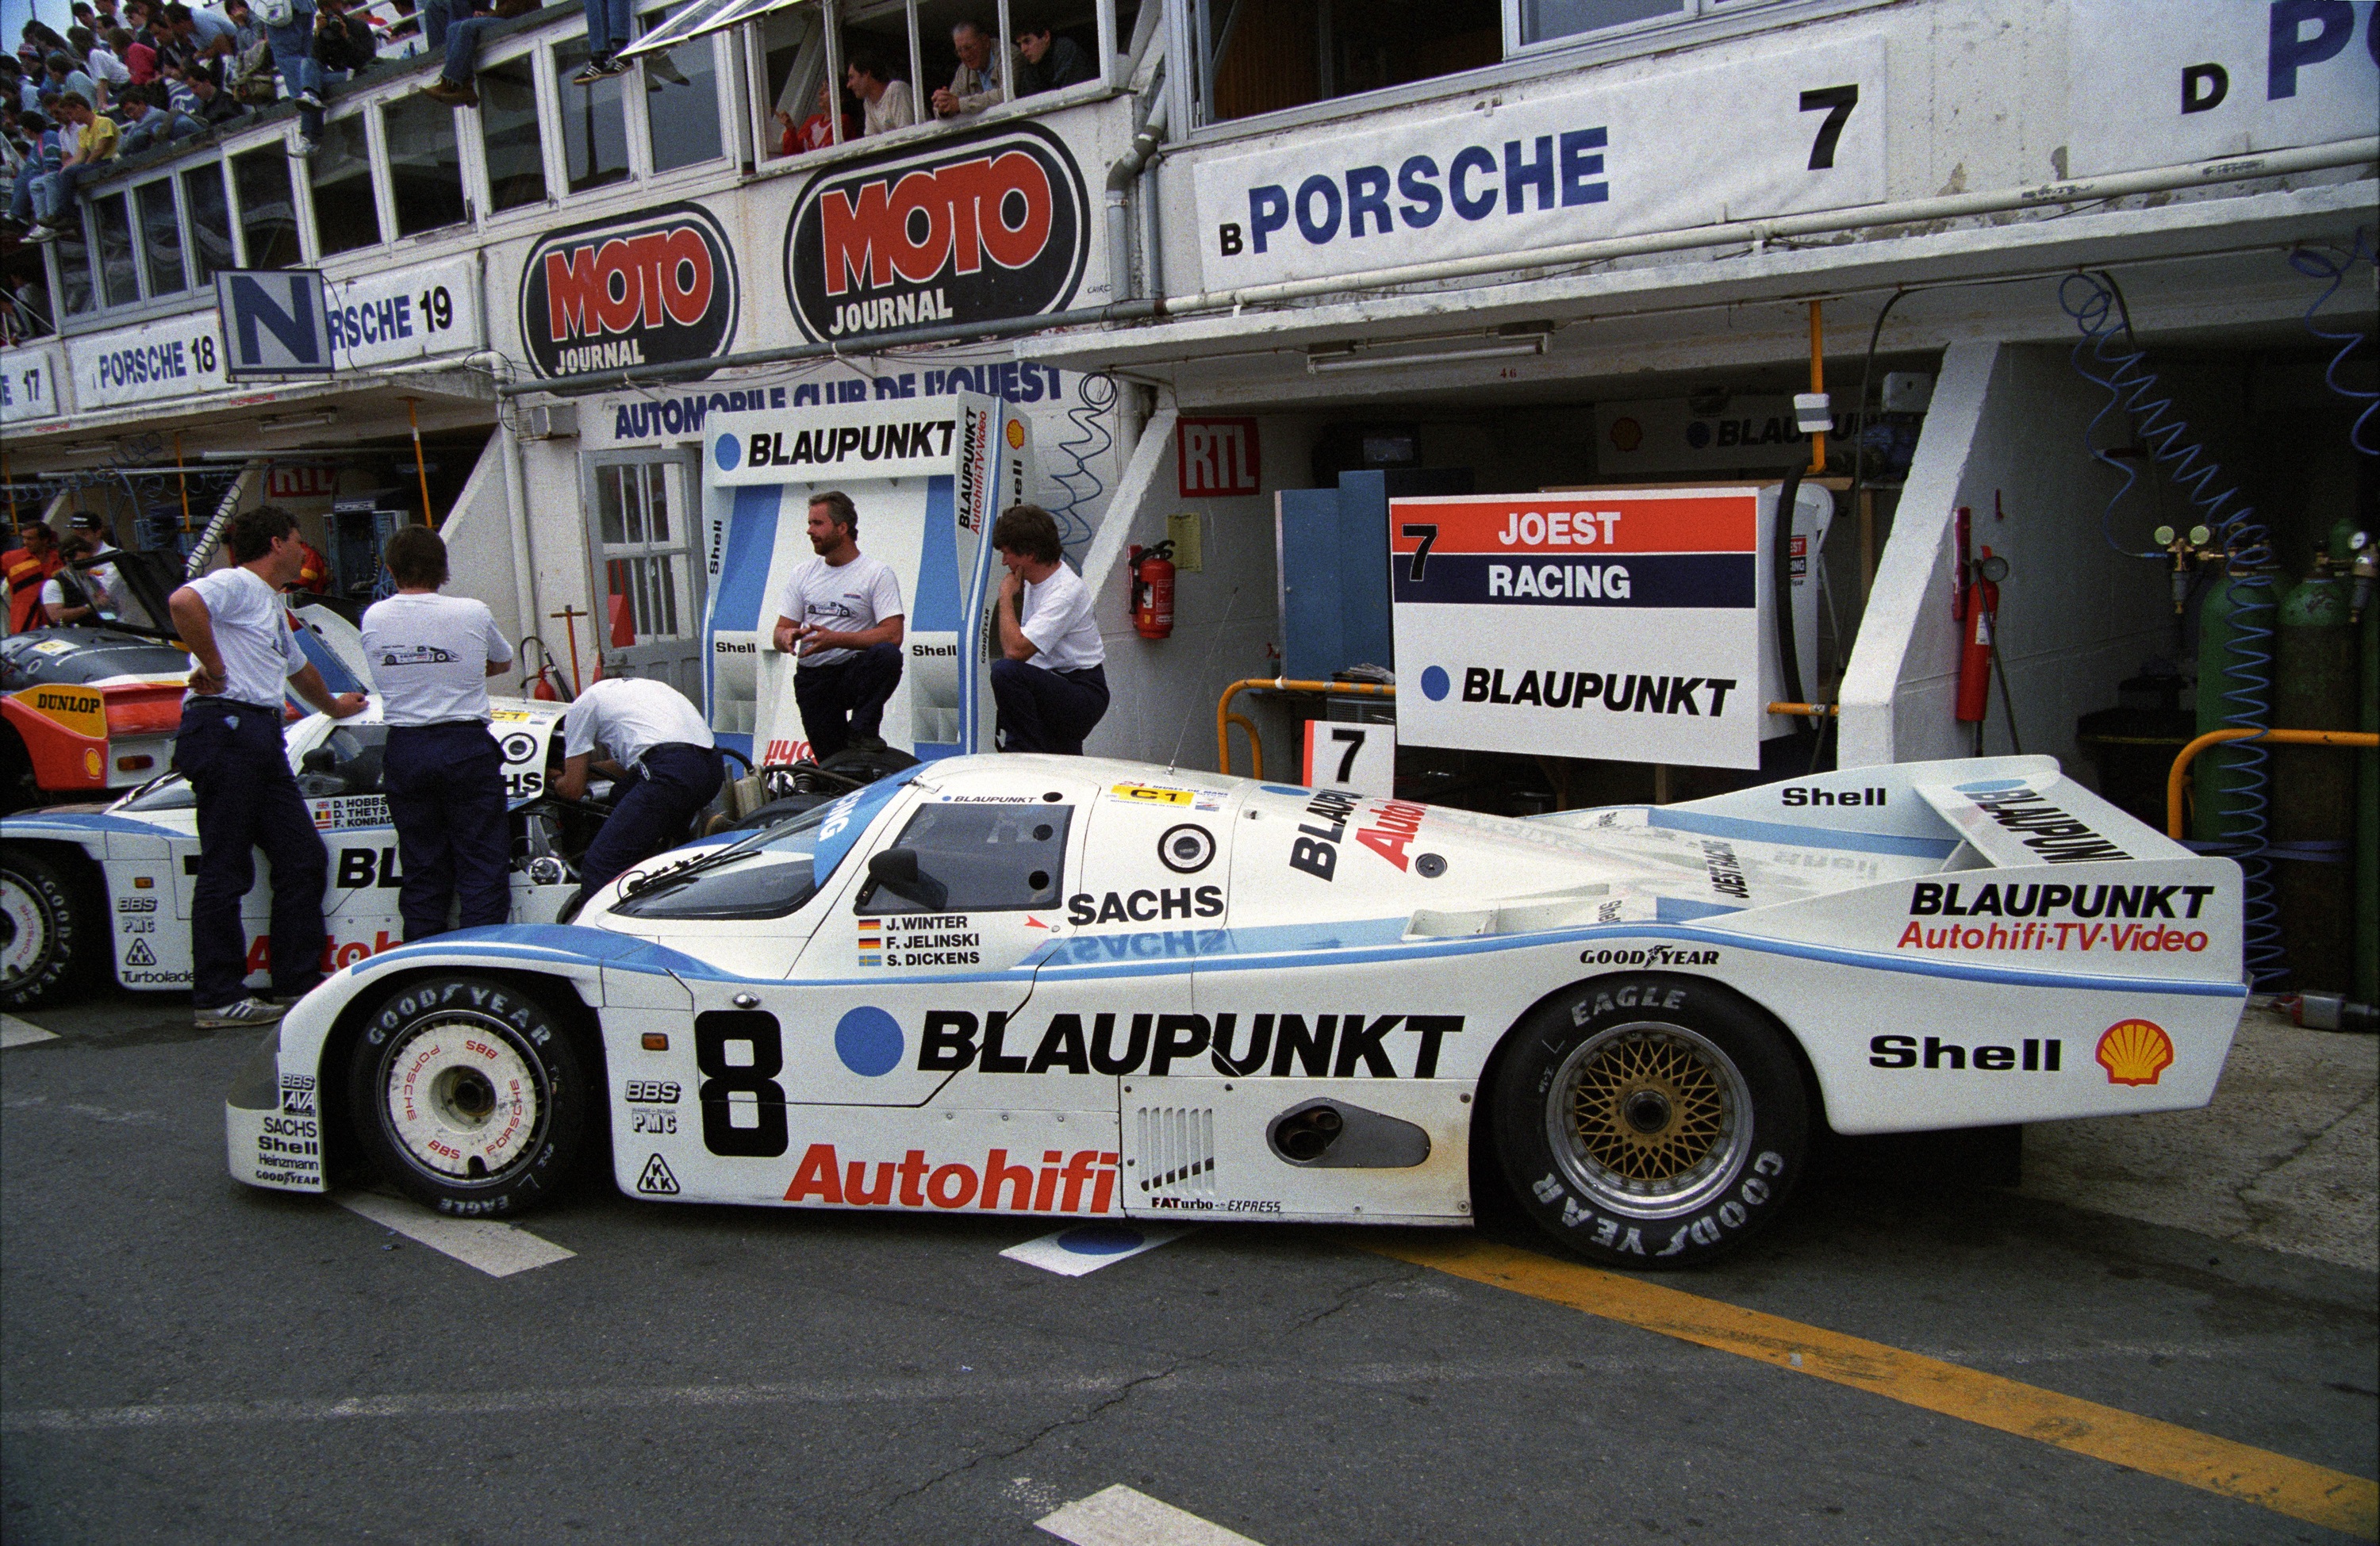 Louis Krages came from an affluent family, who he always claimed did not fund his racing activities. His place was paid for by sponsors like Minolta and Blaupunkt.